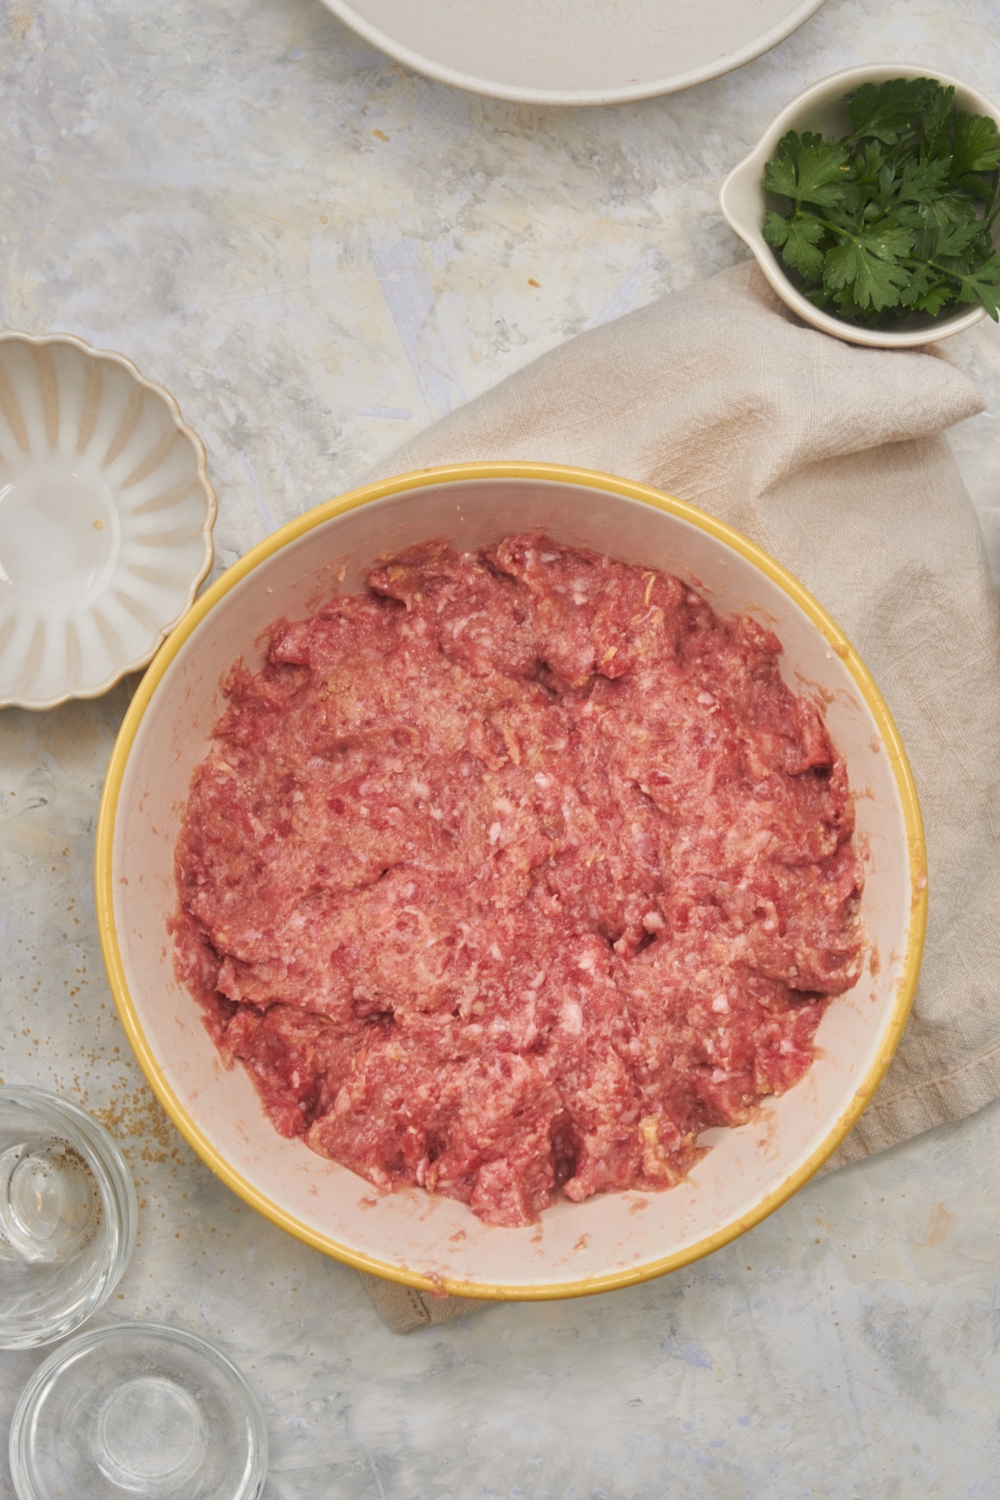 A white and yellow bowl filled with raw ground beef.